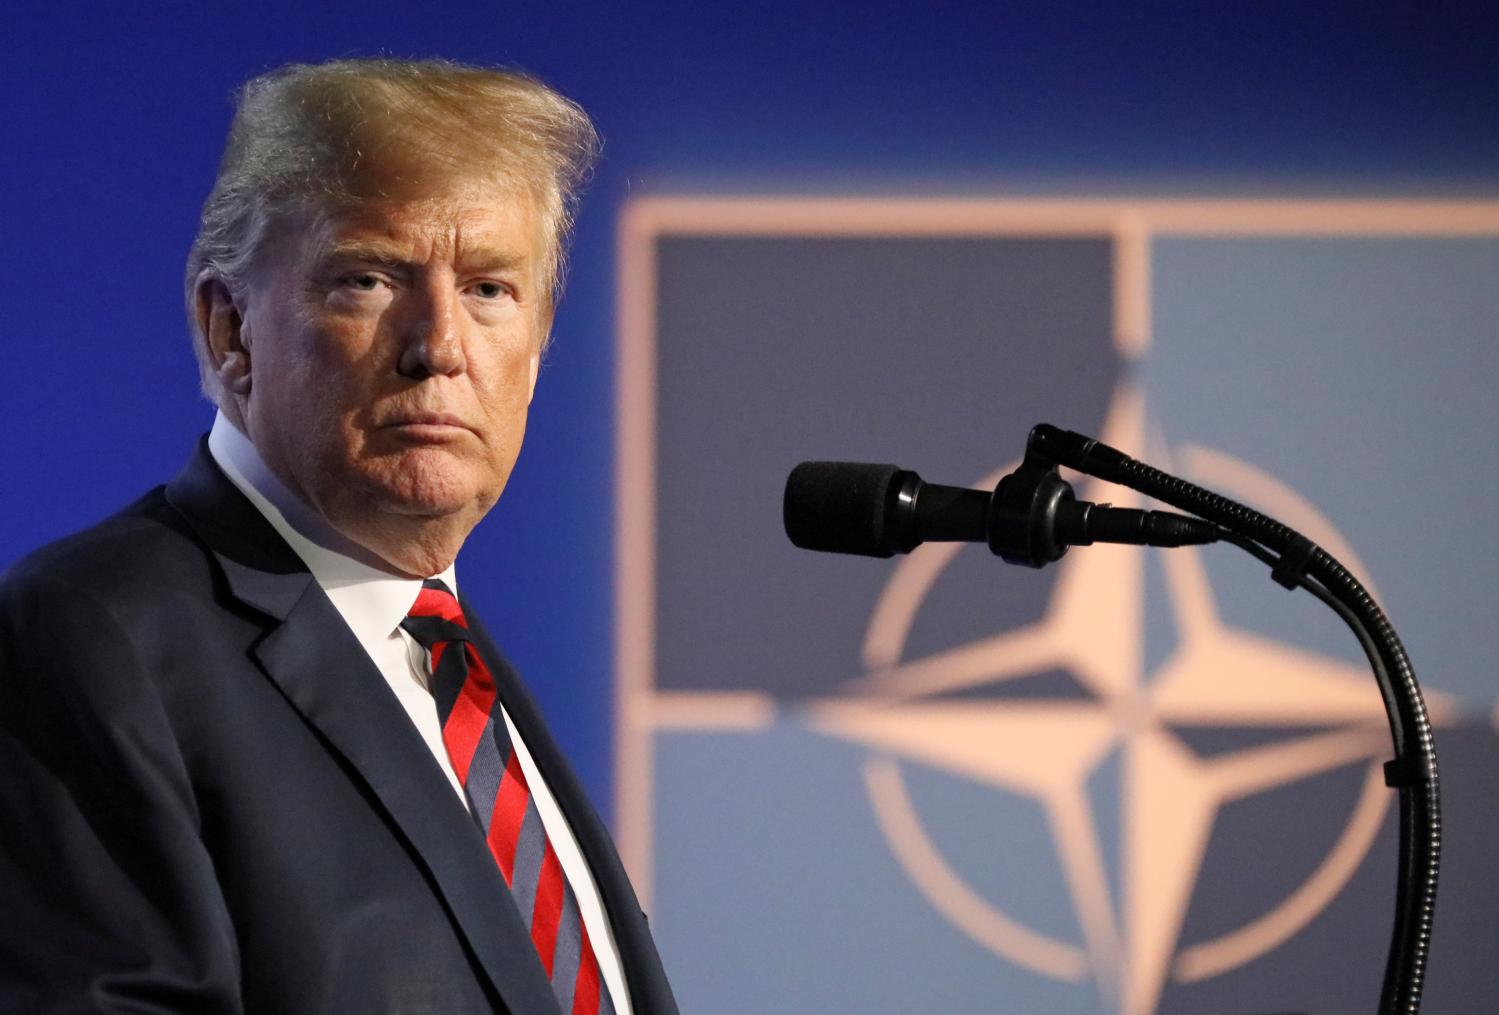 U.S. President Donald Trump looks on as he holds a news conference after participating in the NATO Summit in Brussels, Belgium July 12, 2018. REUTERS/Reinhard Krause - RC11028C7550